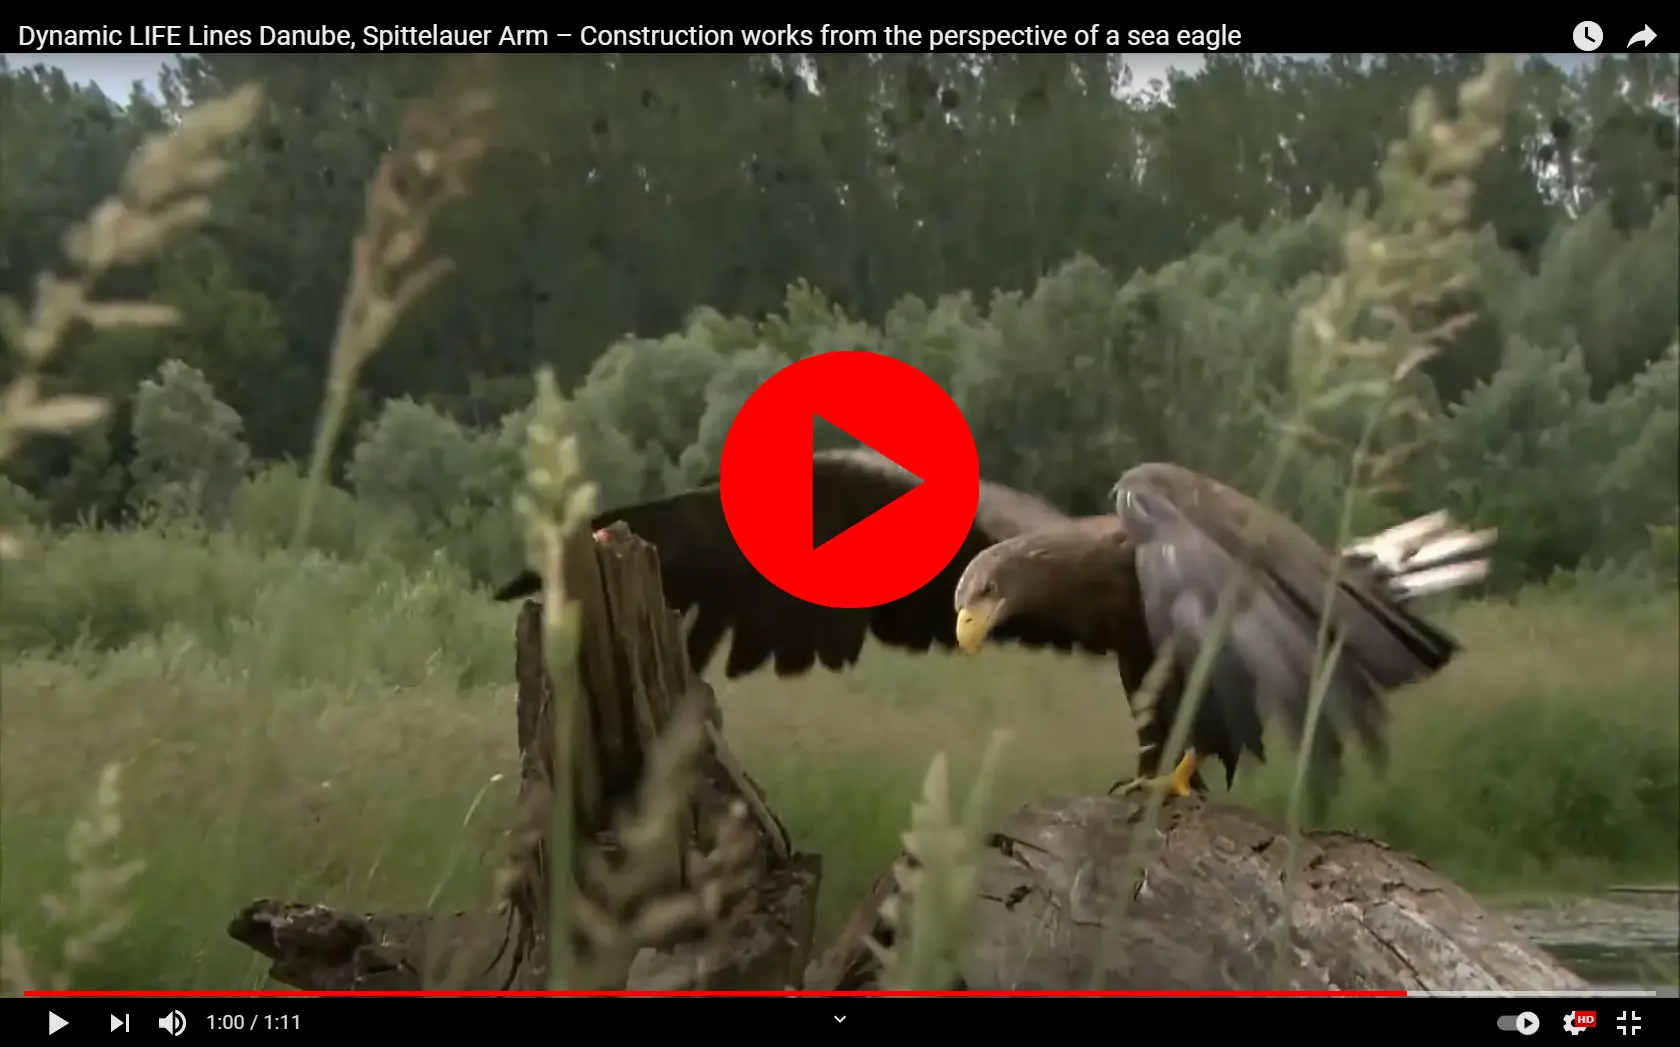 Sea Eagle Video from Spittelauer Arm